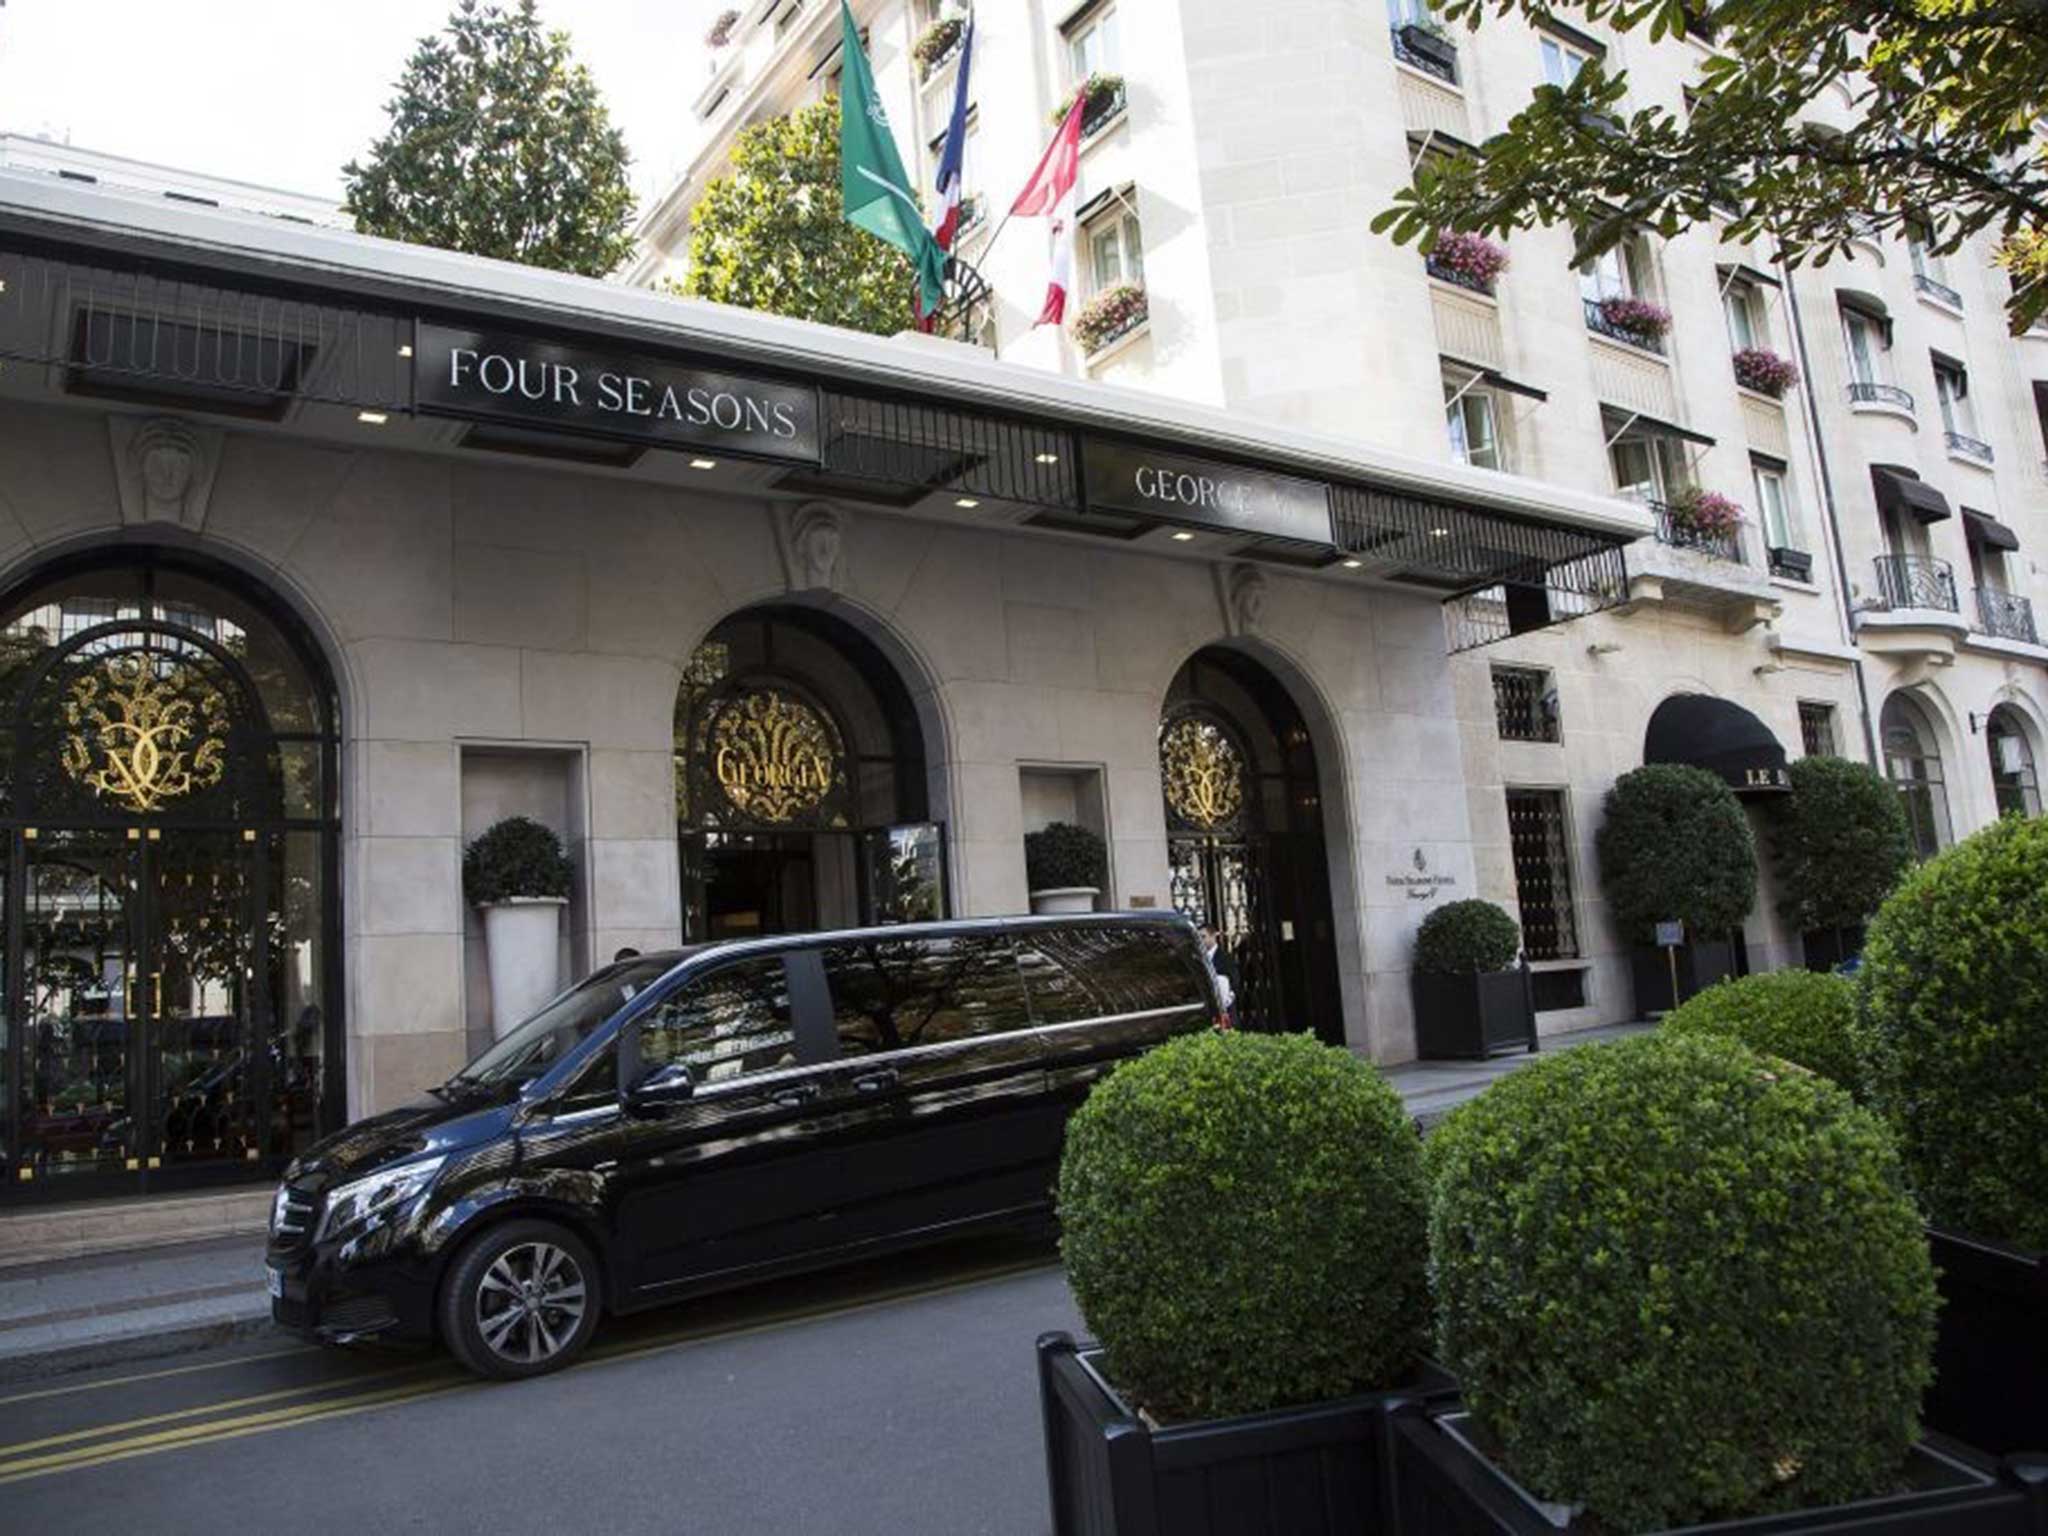 The George V luxury hotel in Paris, which the motorcade left shortly before it was attacked